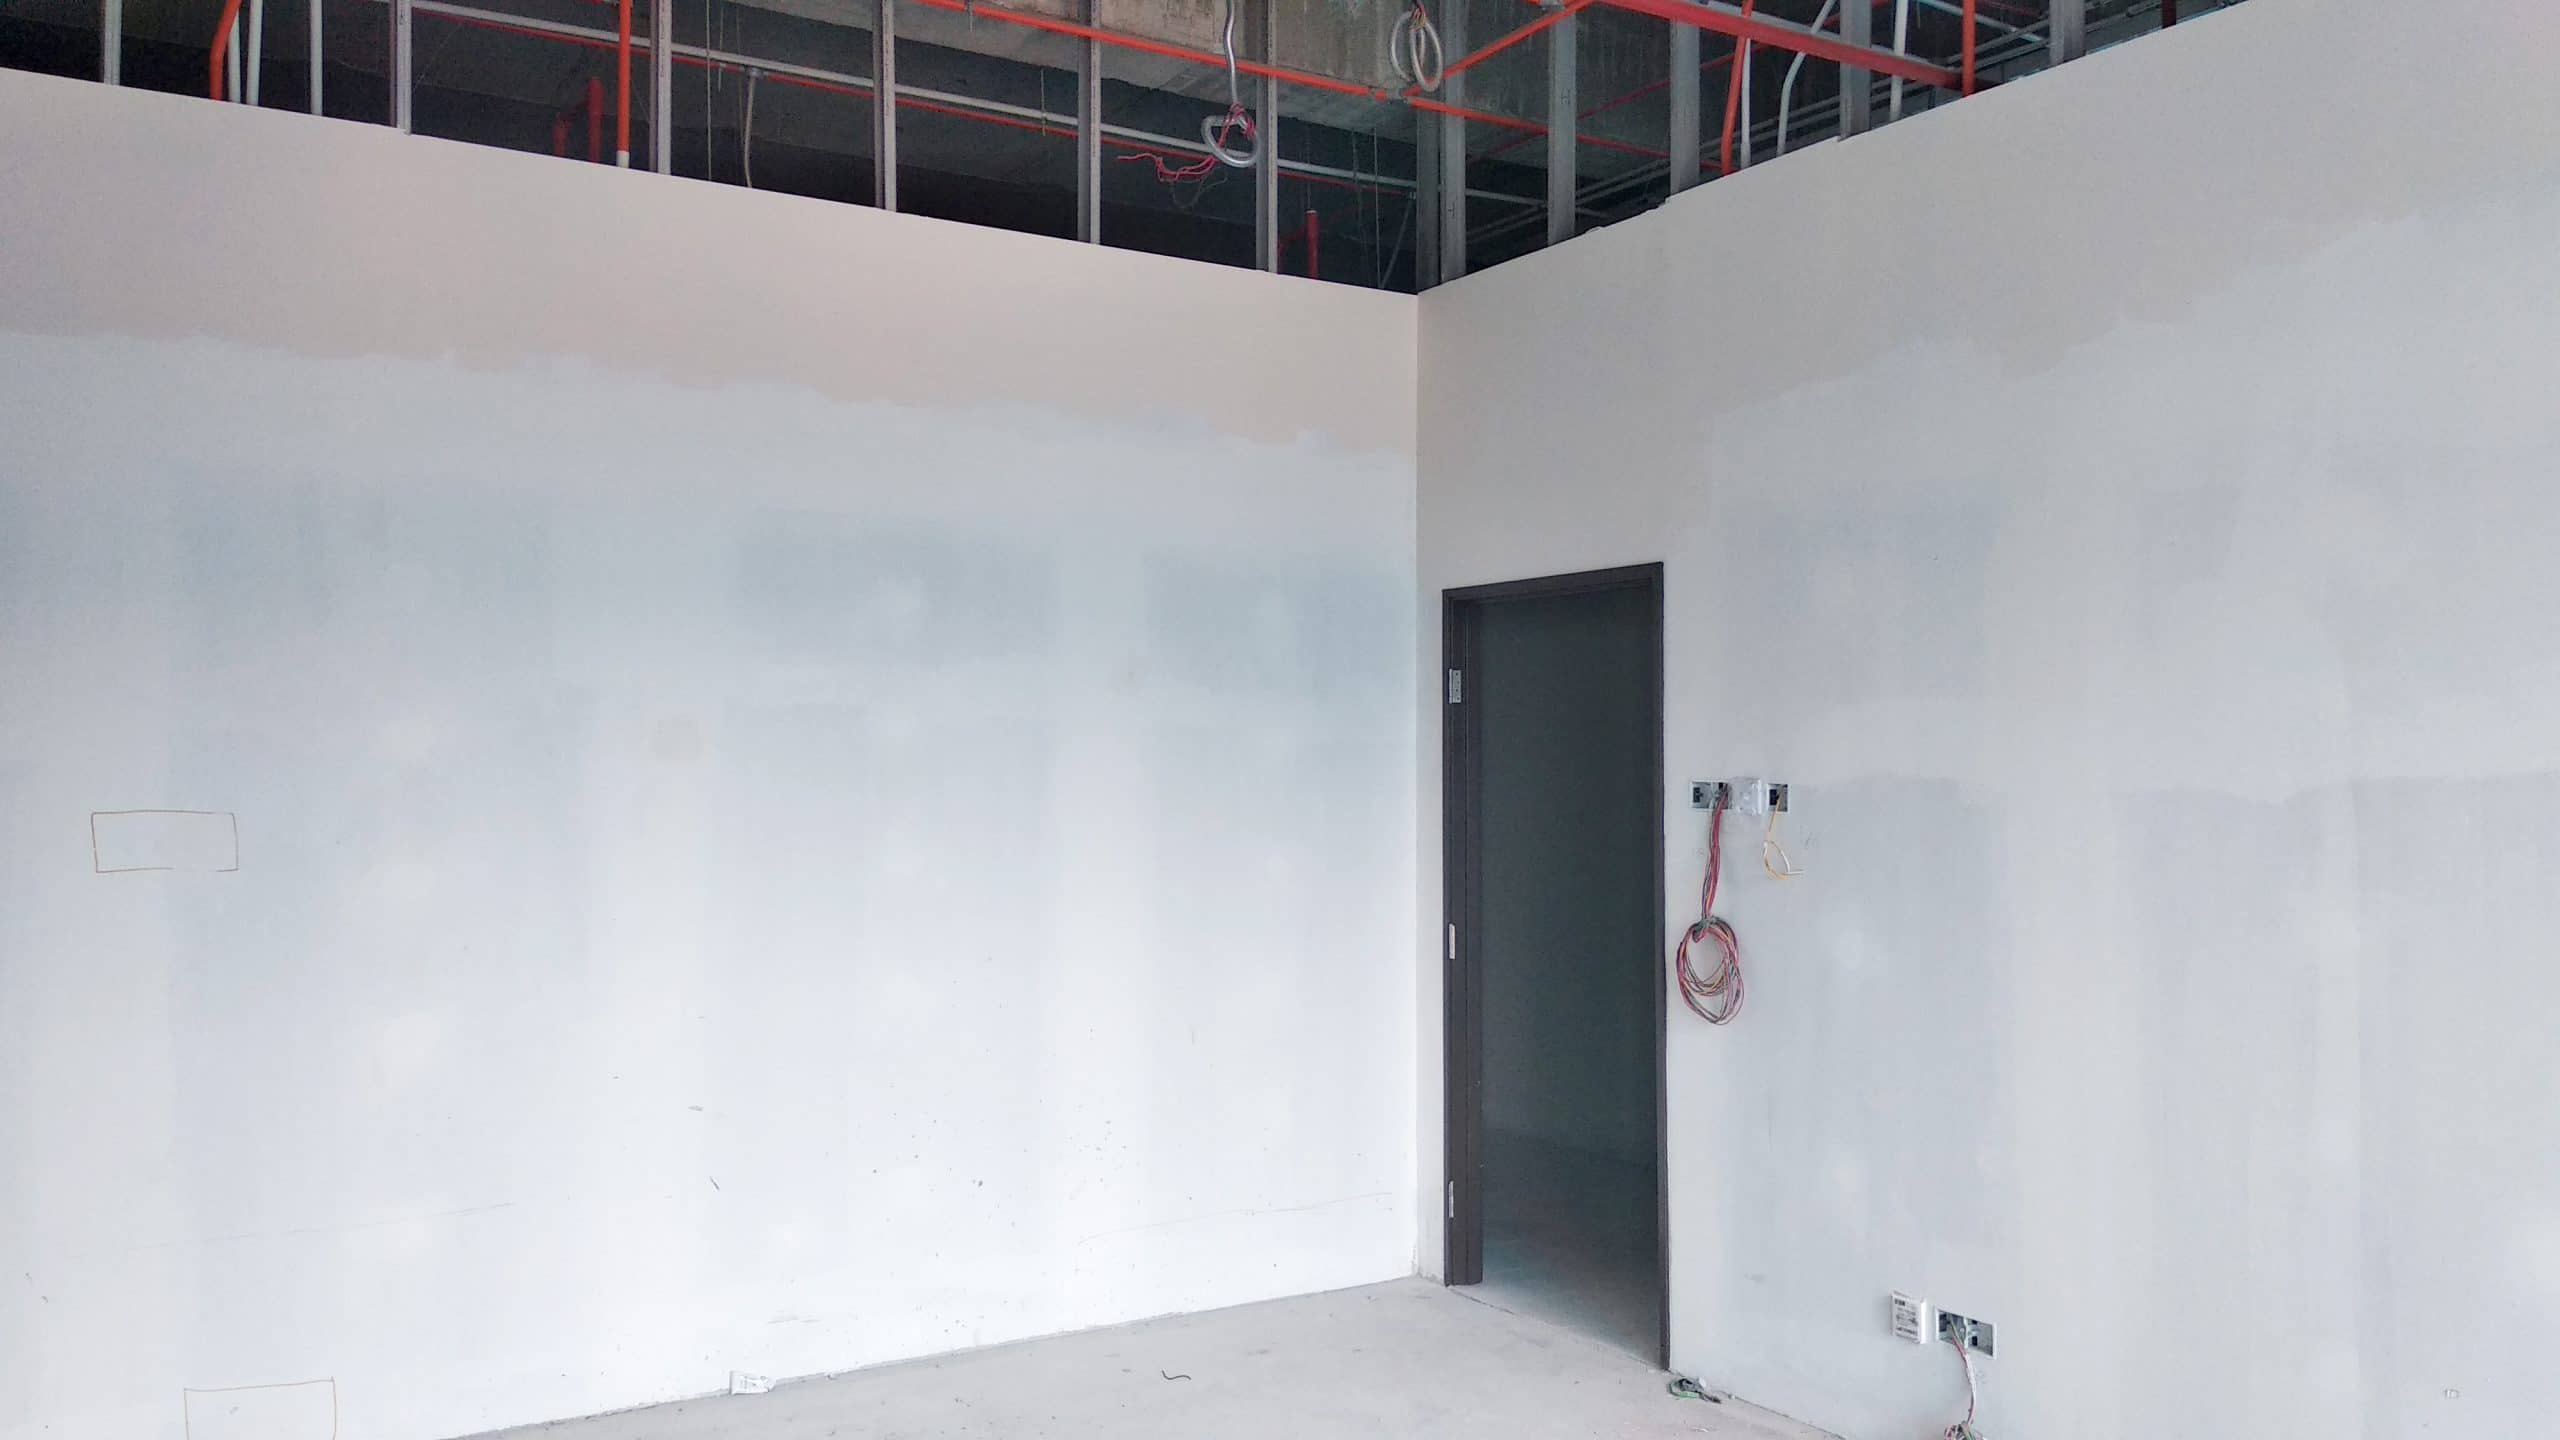 Drywall installation work in progress by construction workers at the construction site. It is the easiest and cheapest way to do partition for an interior wall.